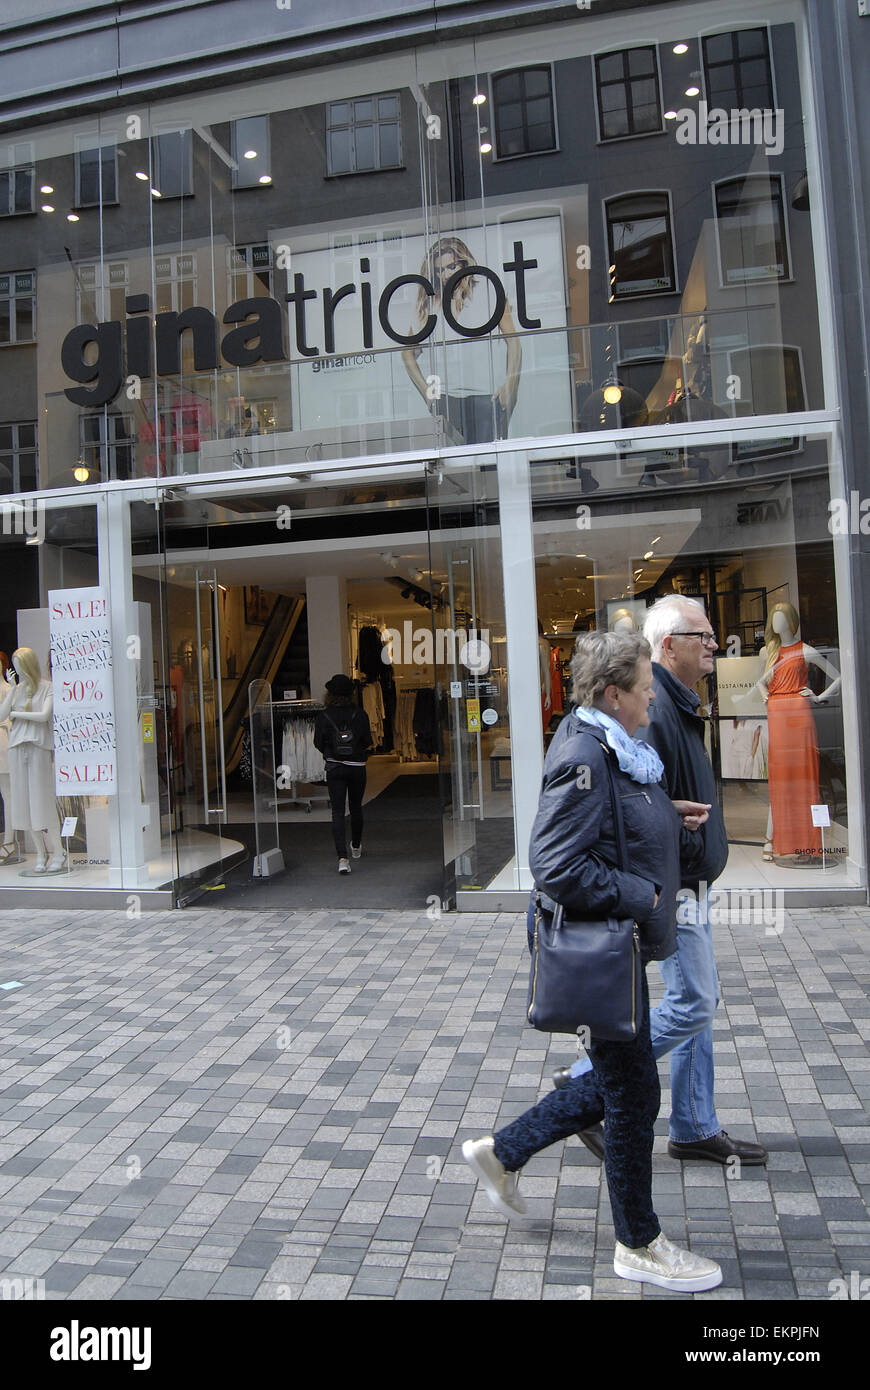 Gina Tricot. Gina Tricot a Swedish fashion chain that offers clothes to women in 30 countries Stock Photo - Alamy